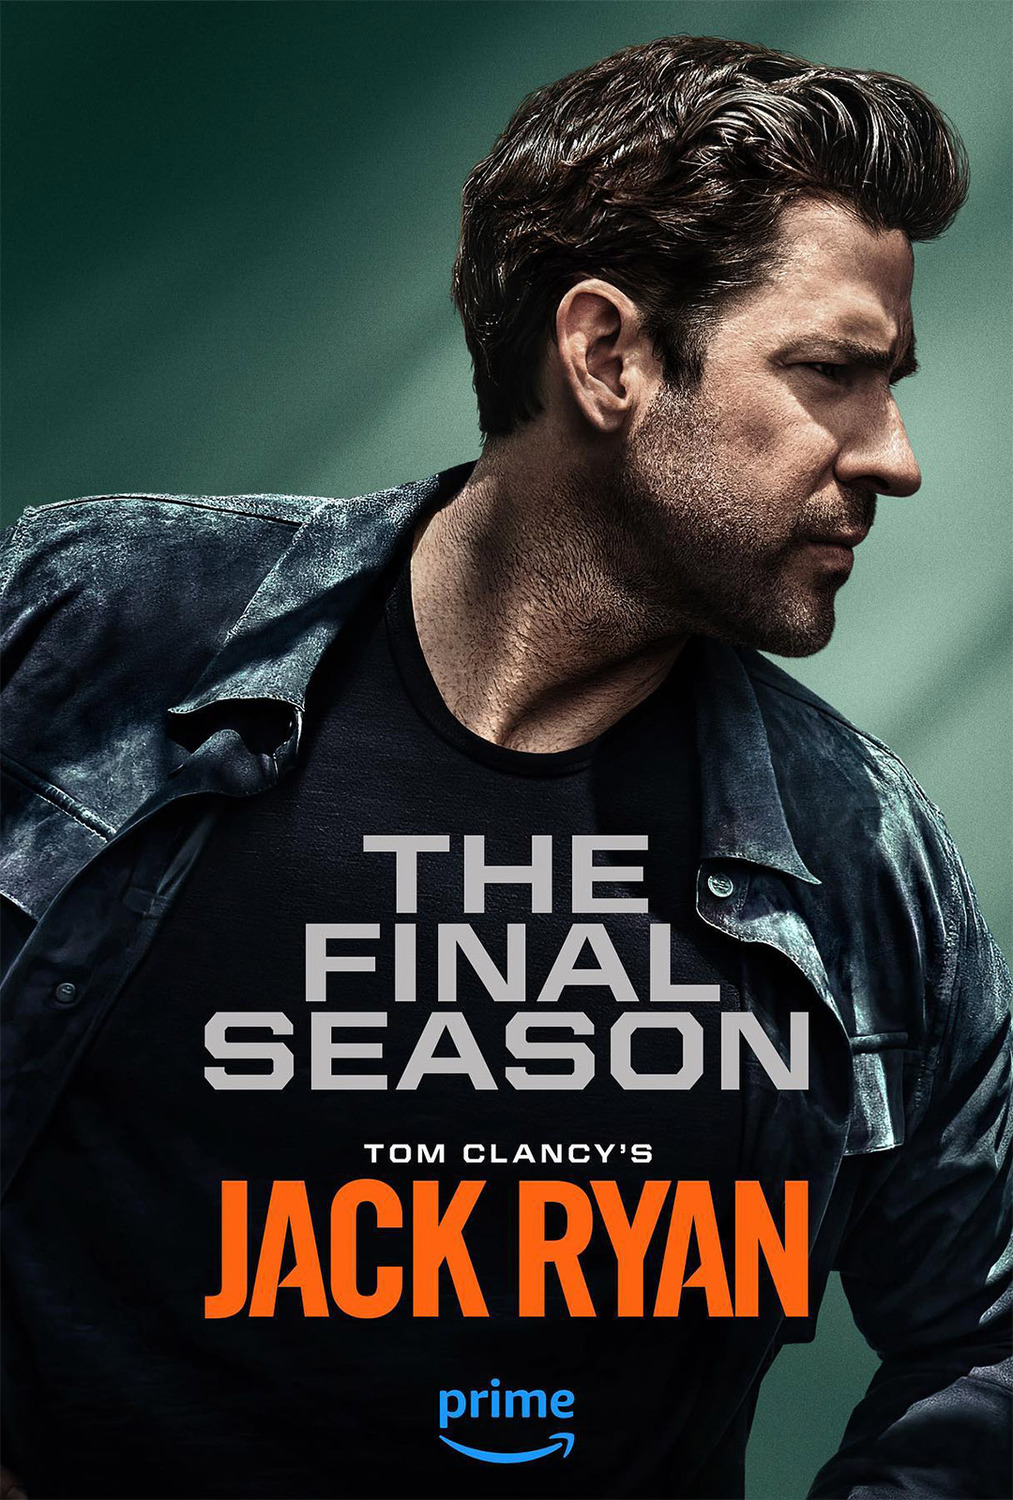 Extra Large TV Poster Image for Tom Clancy's Jack Ryan (#12 of 13)